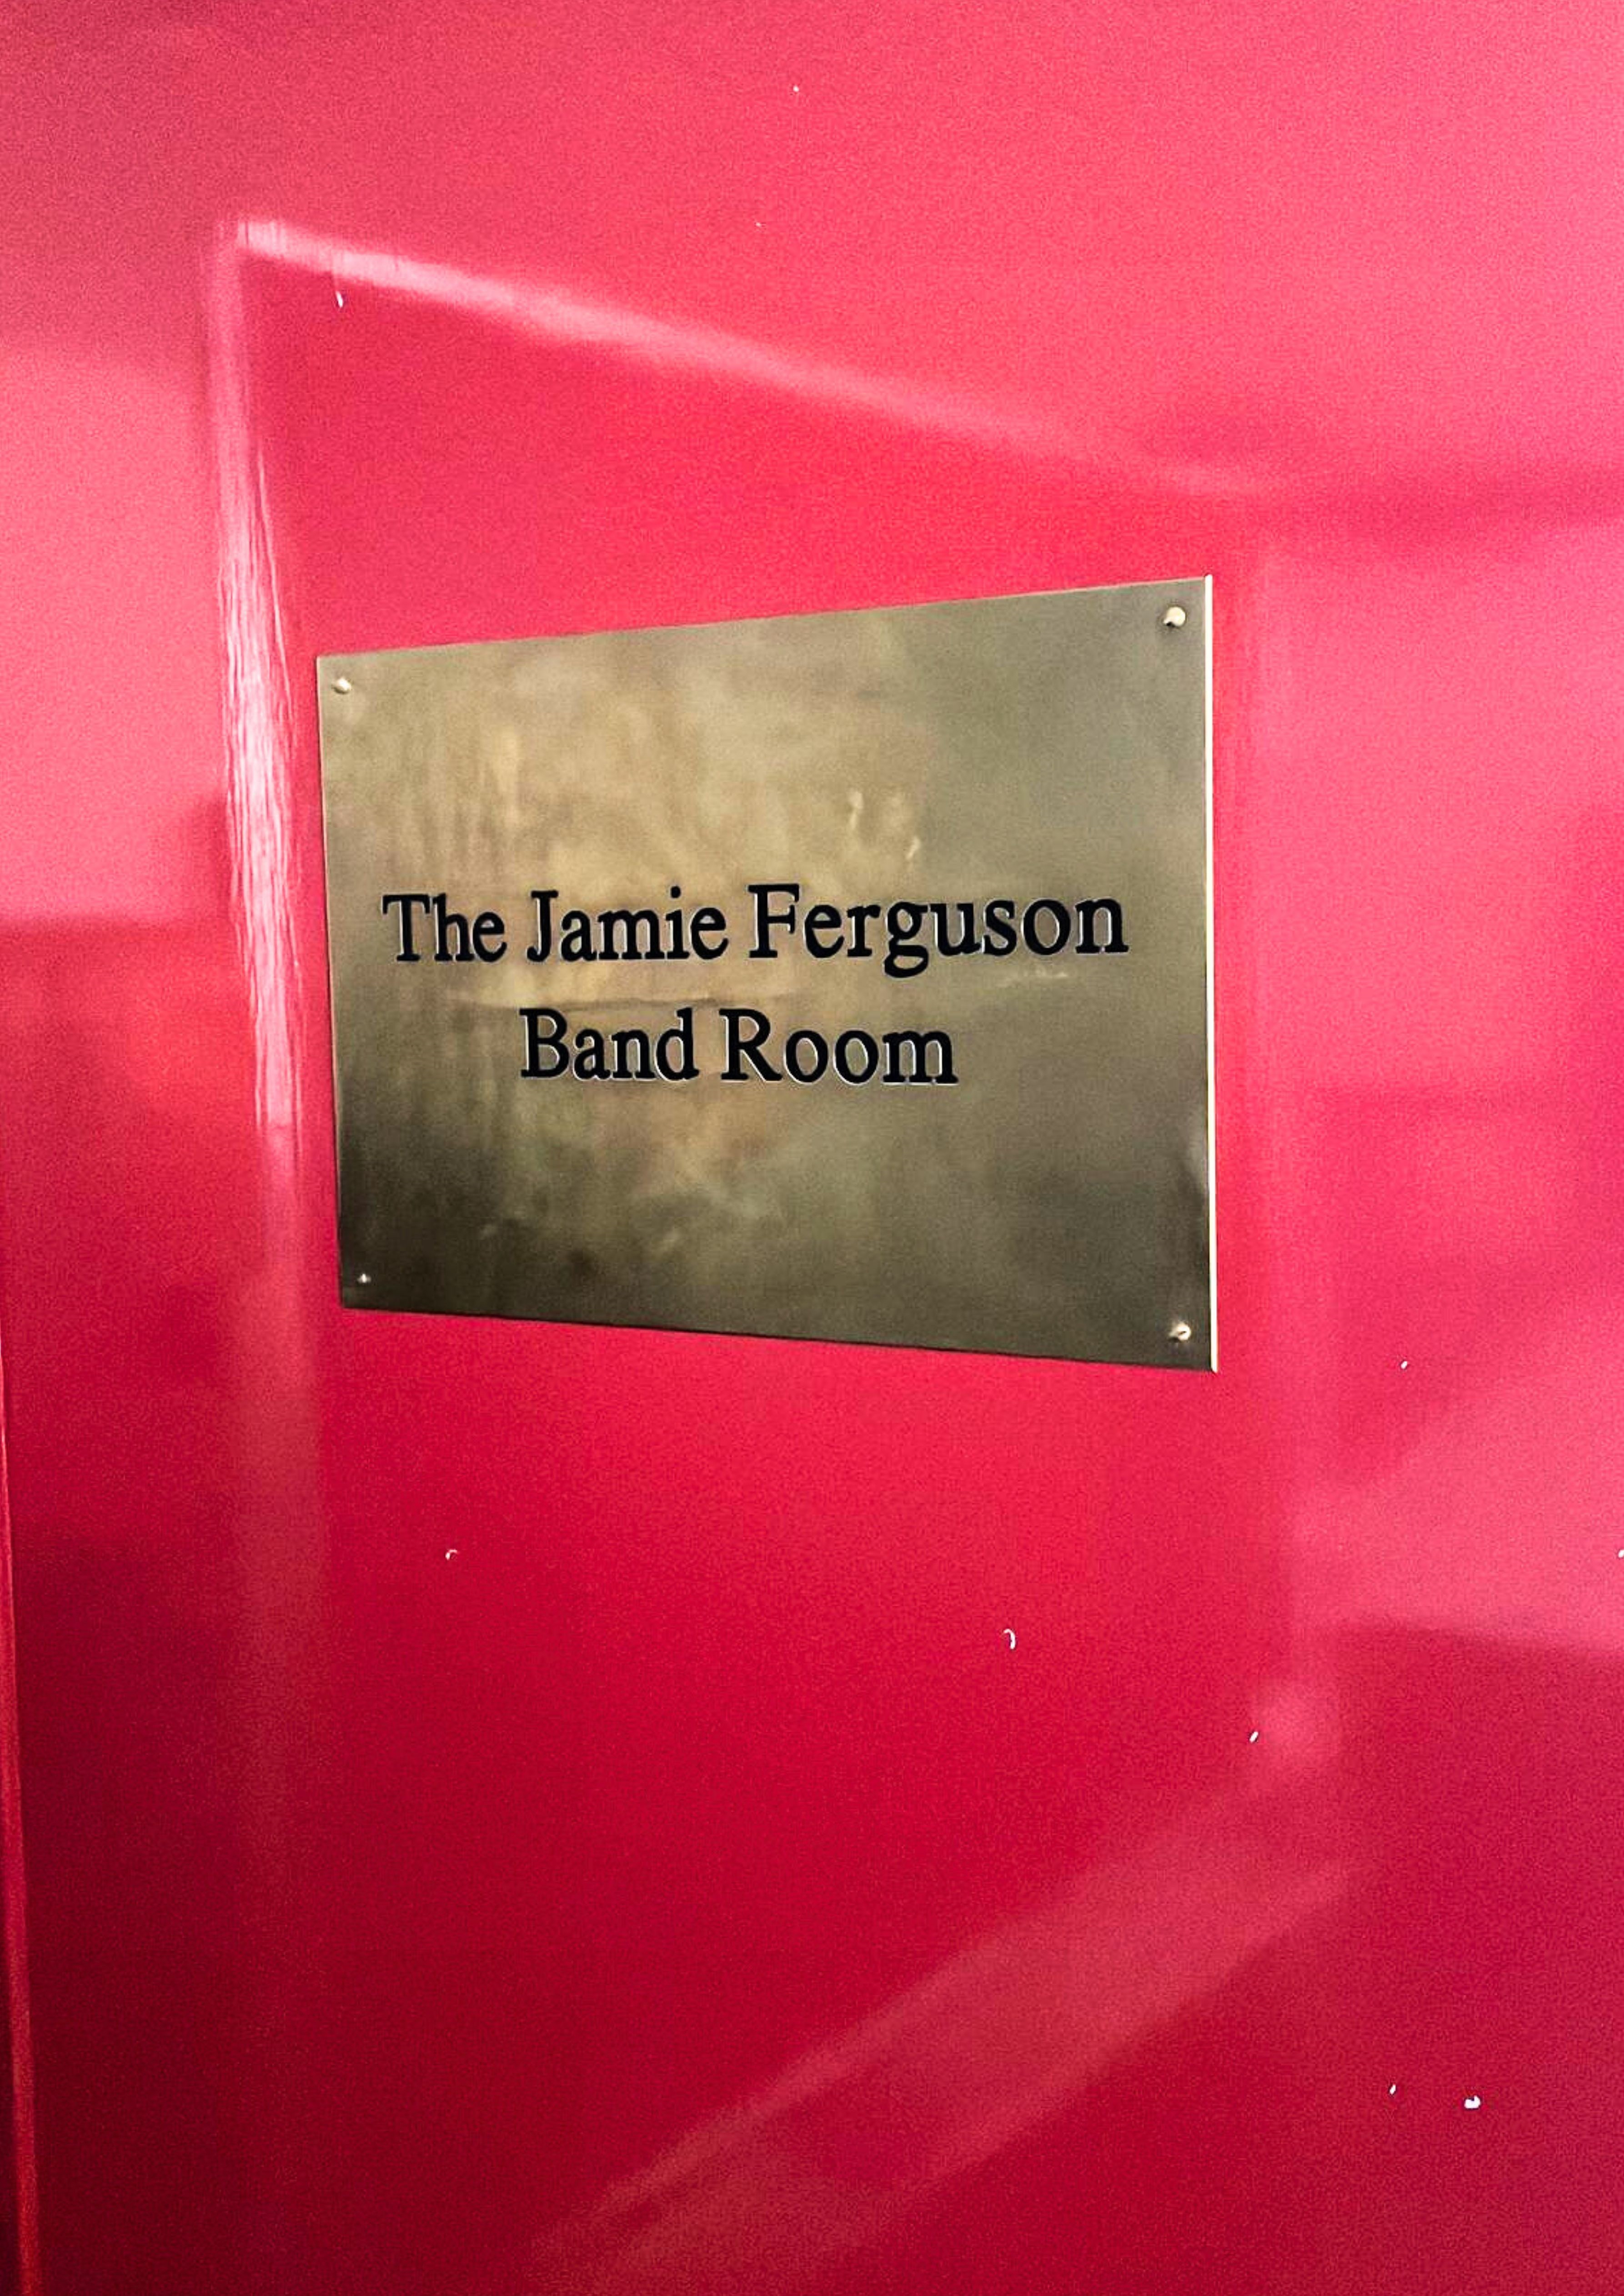 A gold plaque on a red door in tribute to Jamie Ferguson